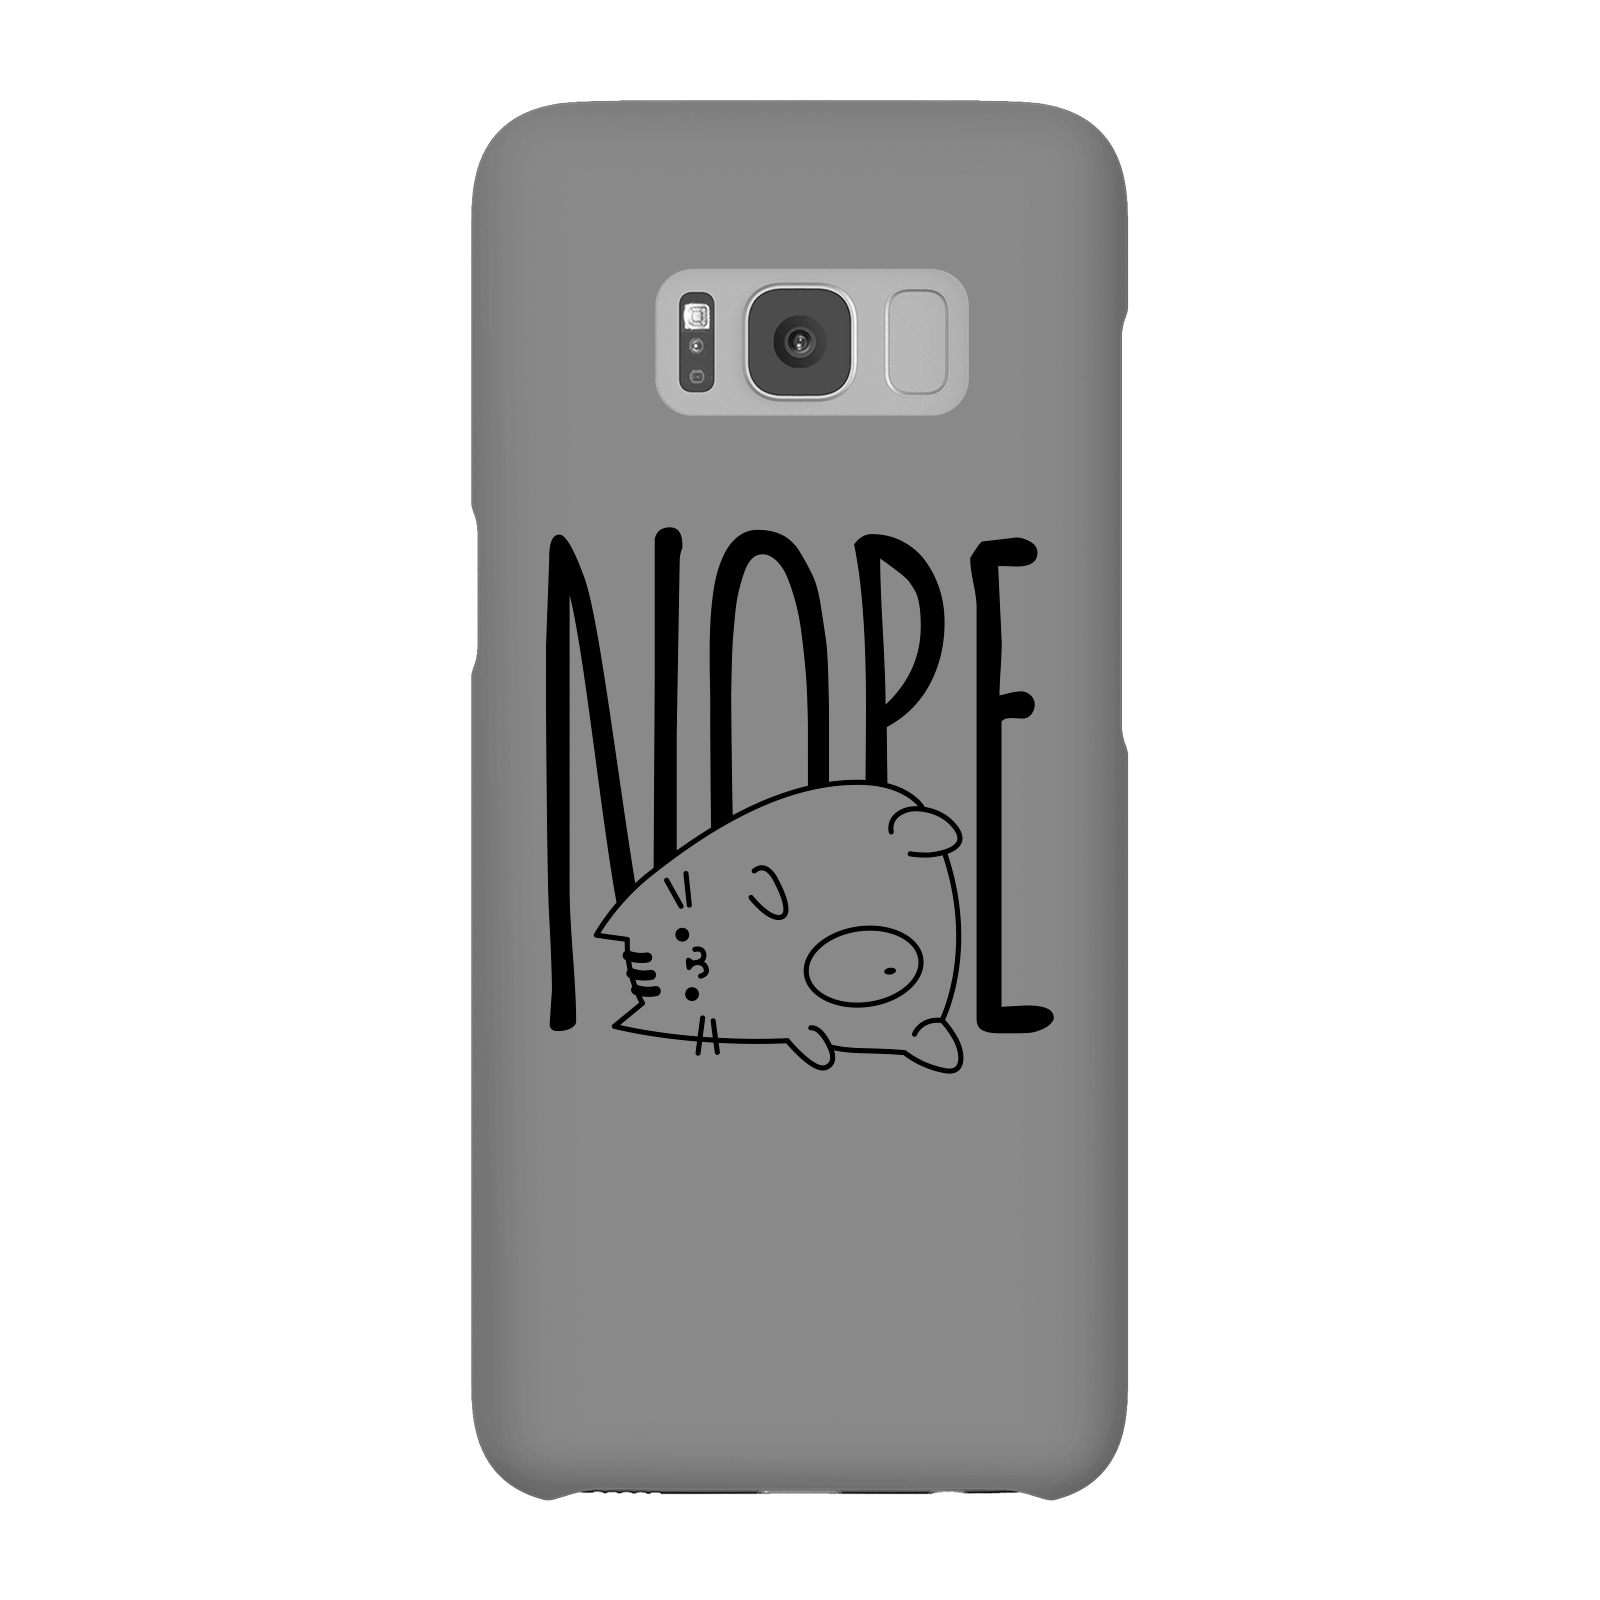 Nope Phone Case for iPhone and Android - Samsung S8 - Snap Case - Gloss